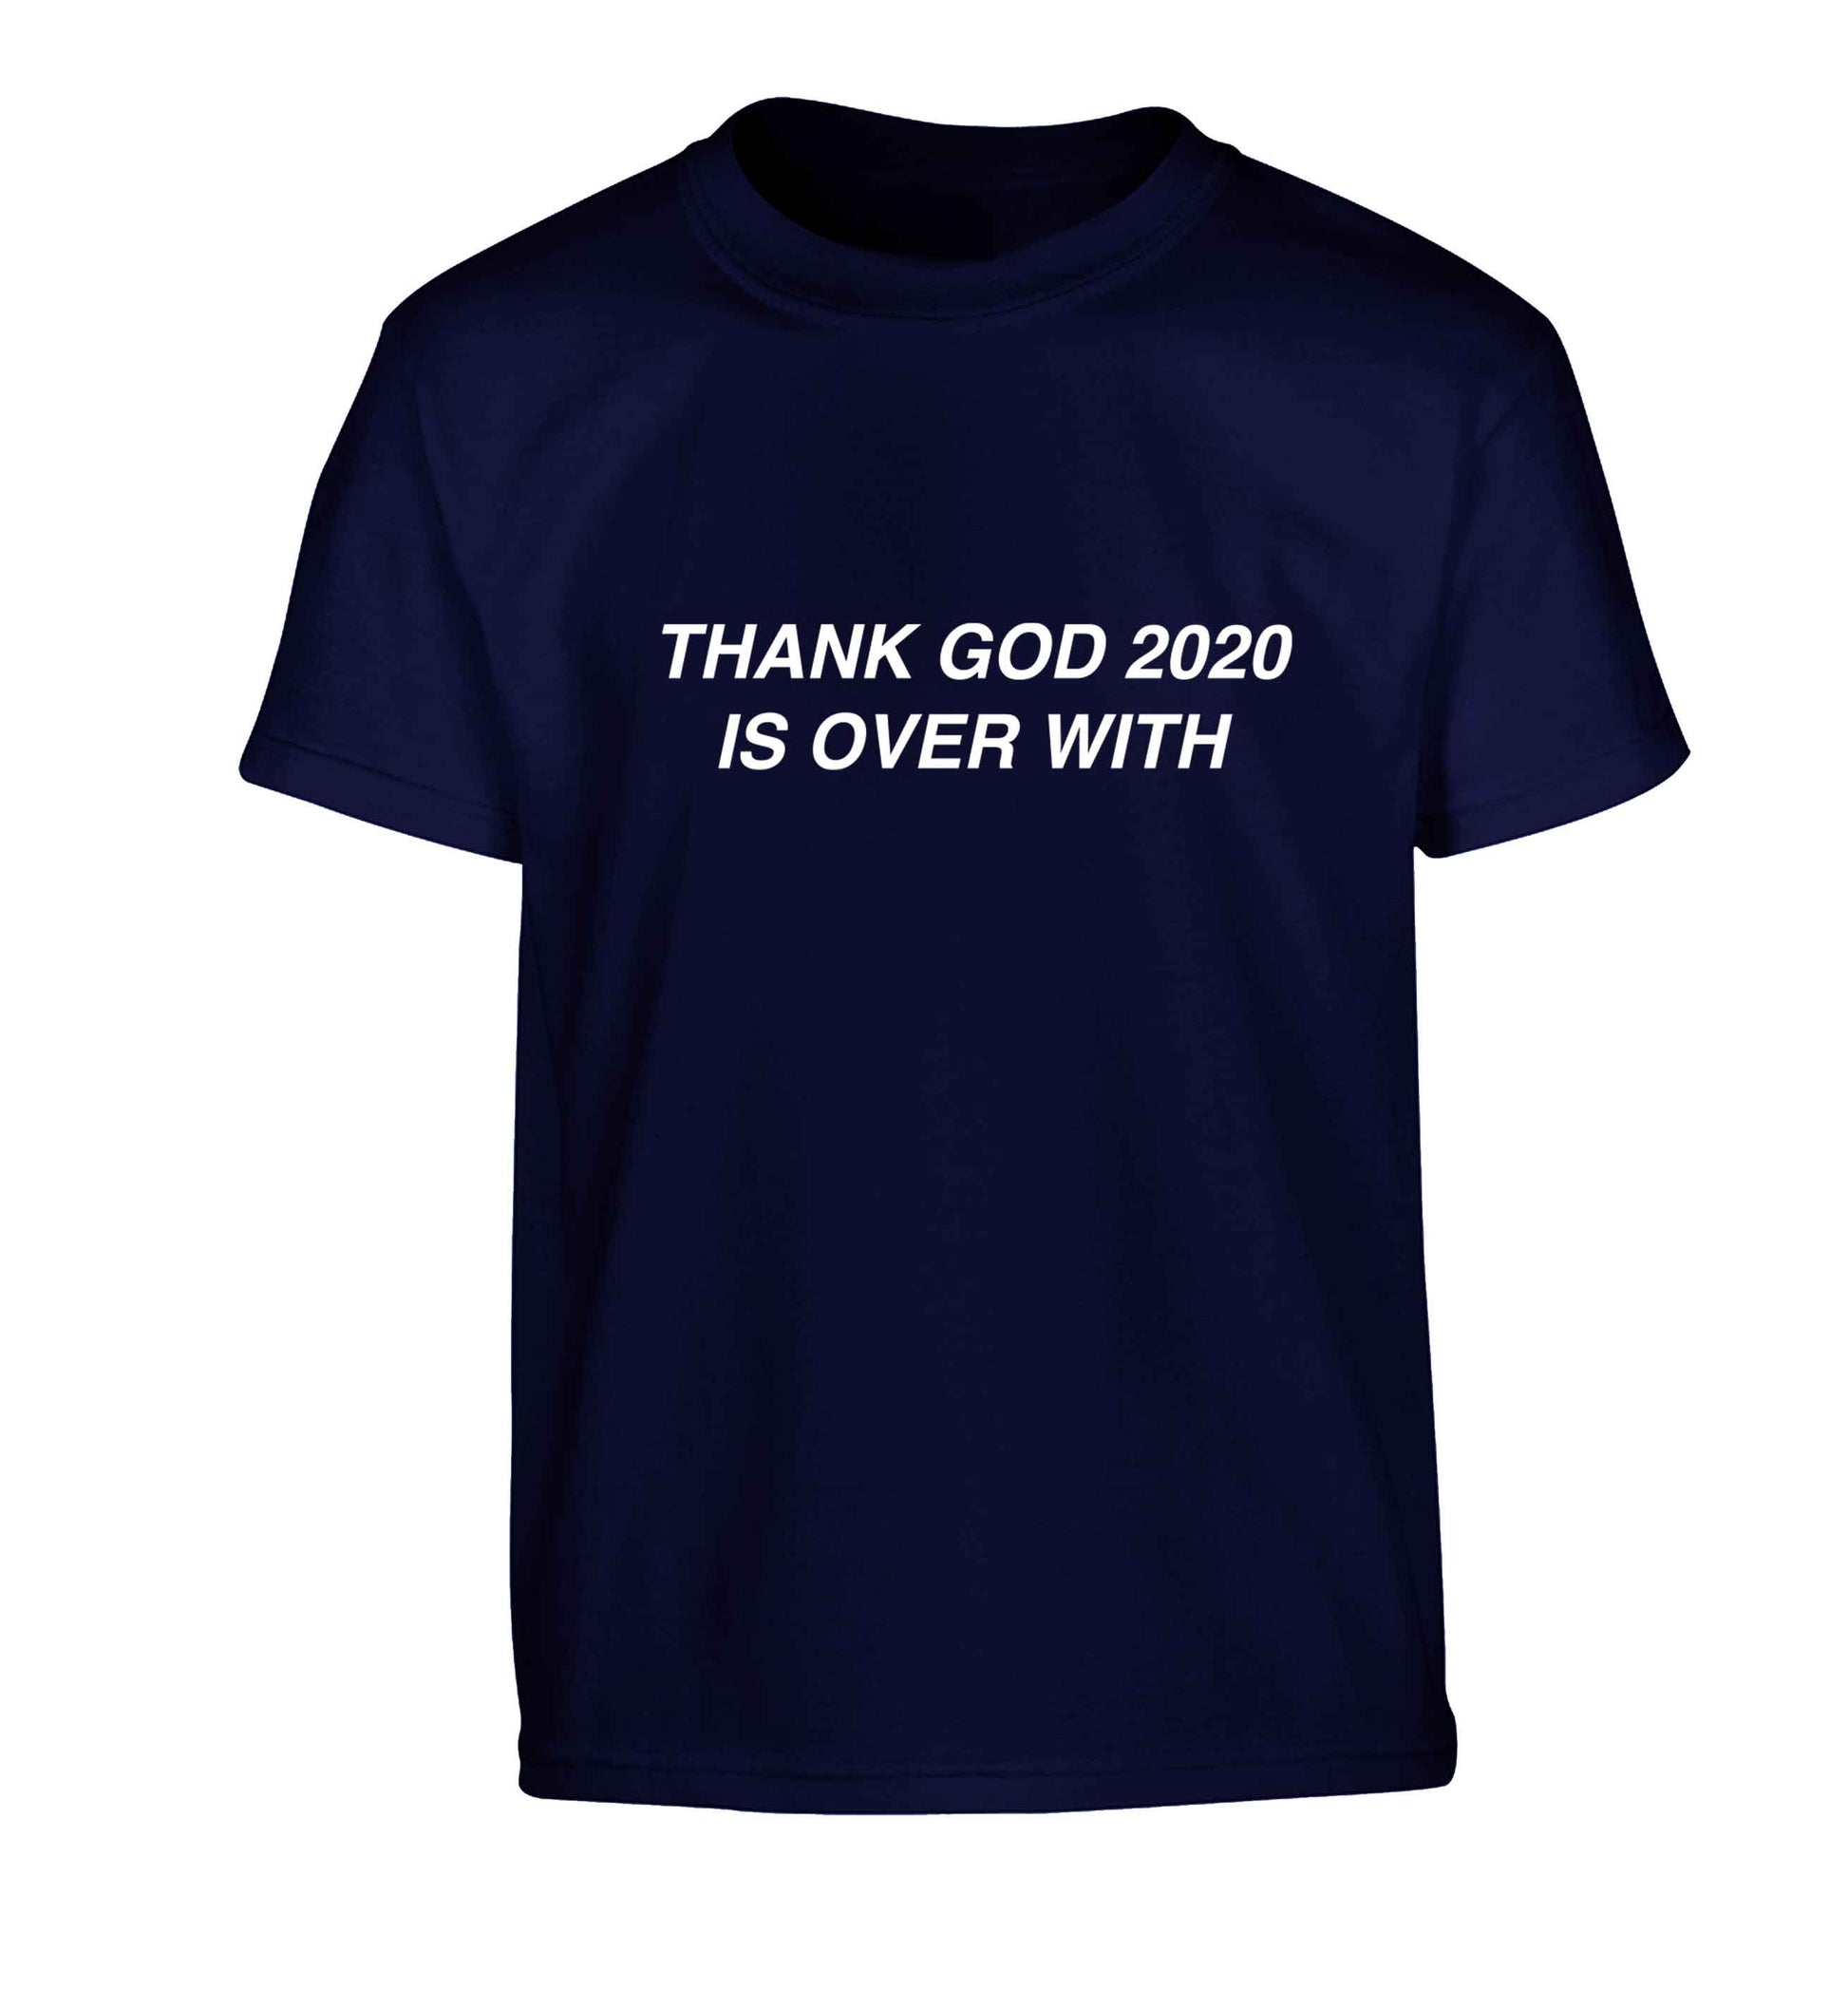 Thank god 2020 is over with Children's navy Tshirt 12-13 Years